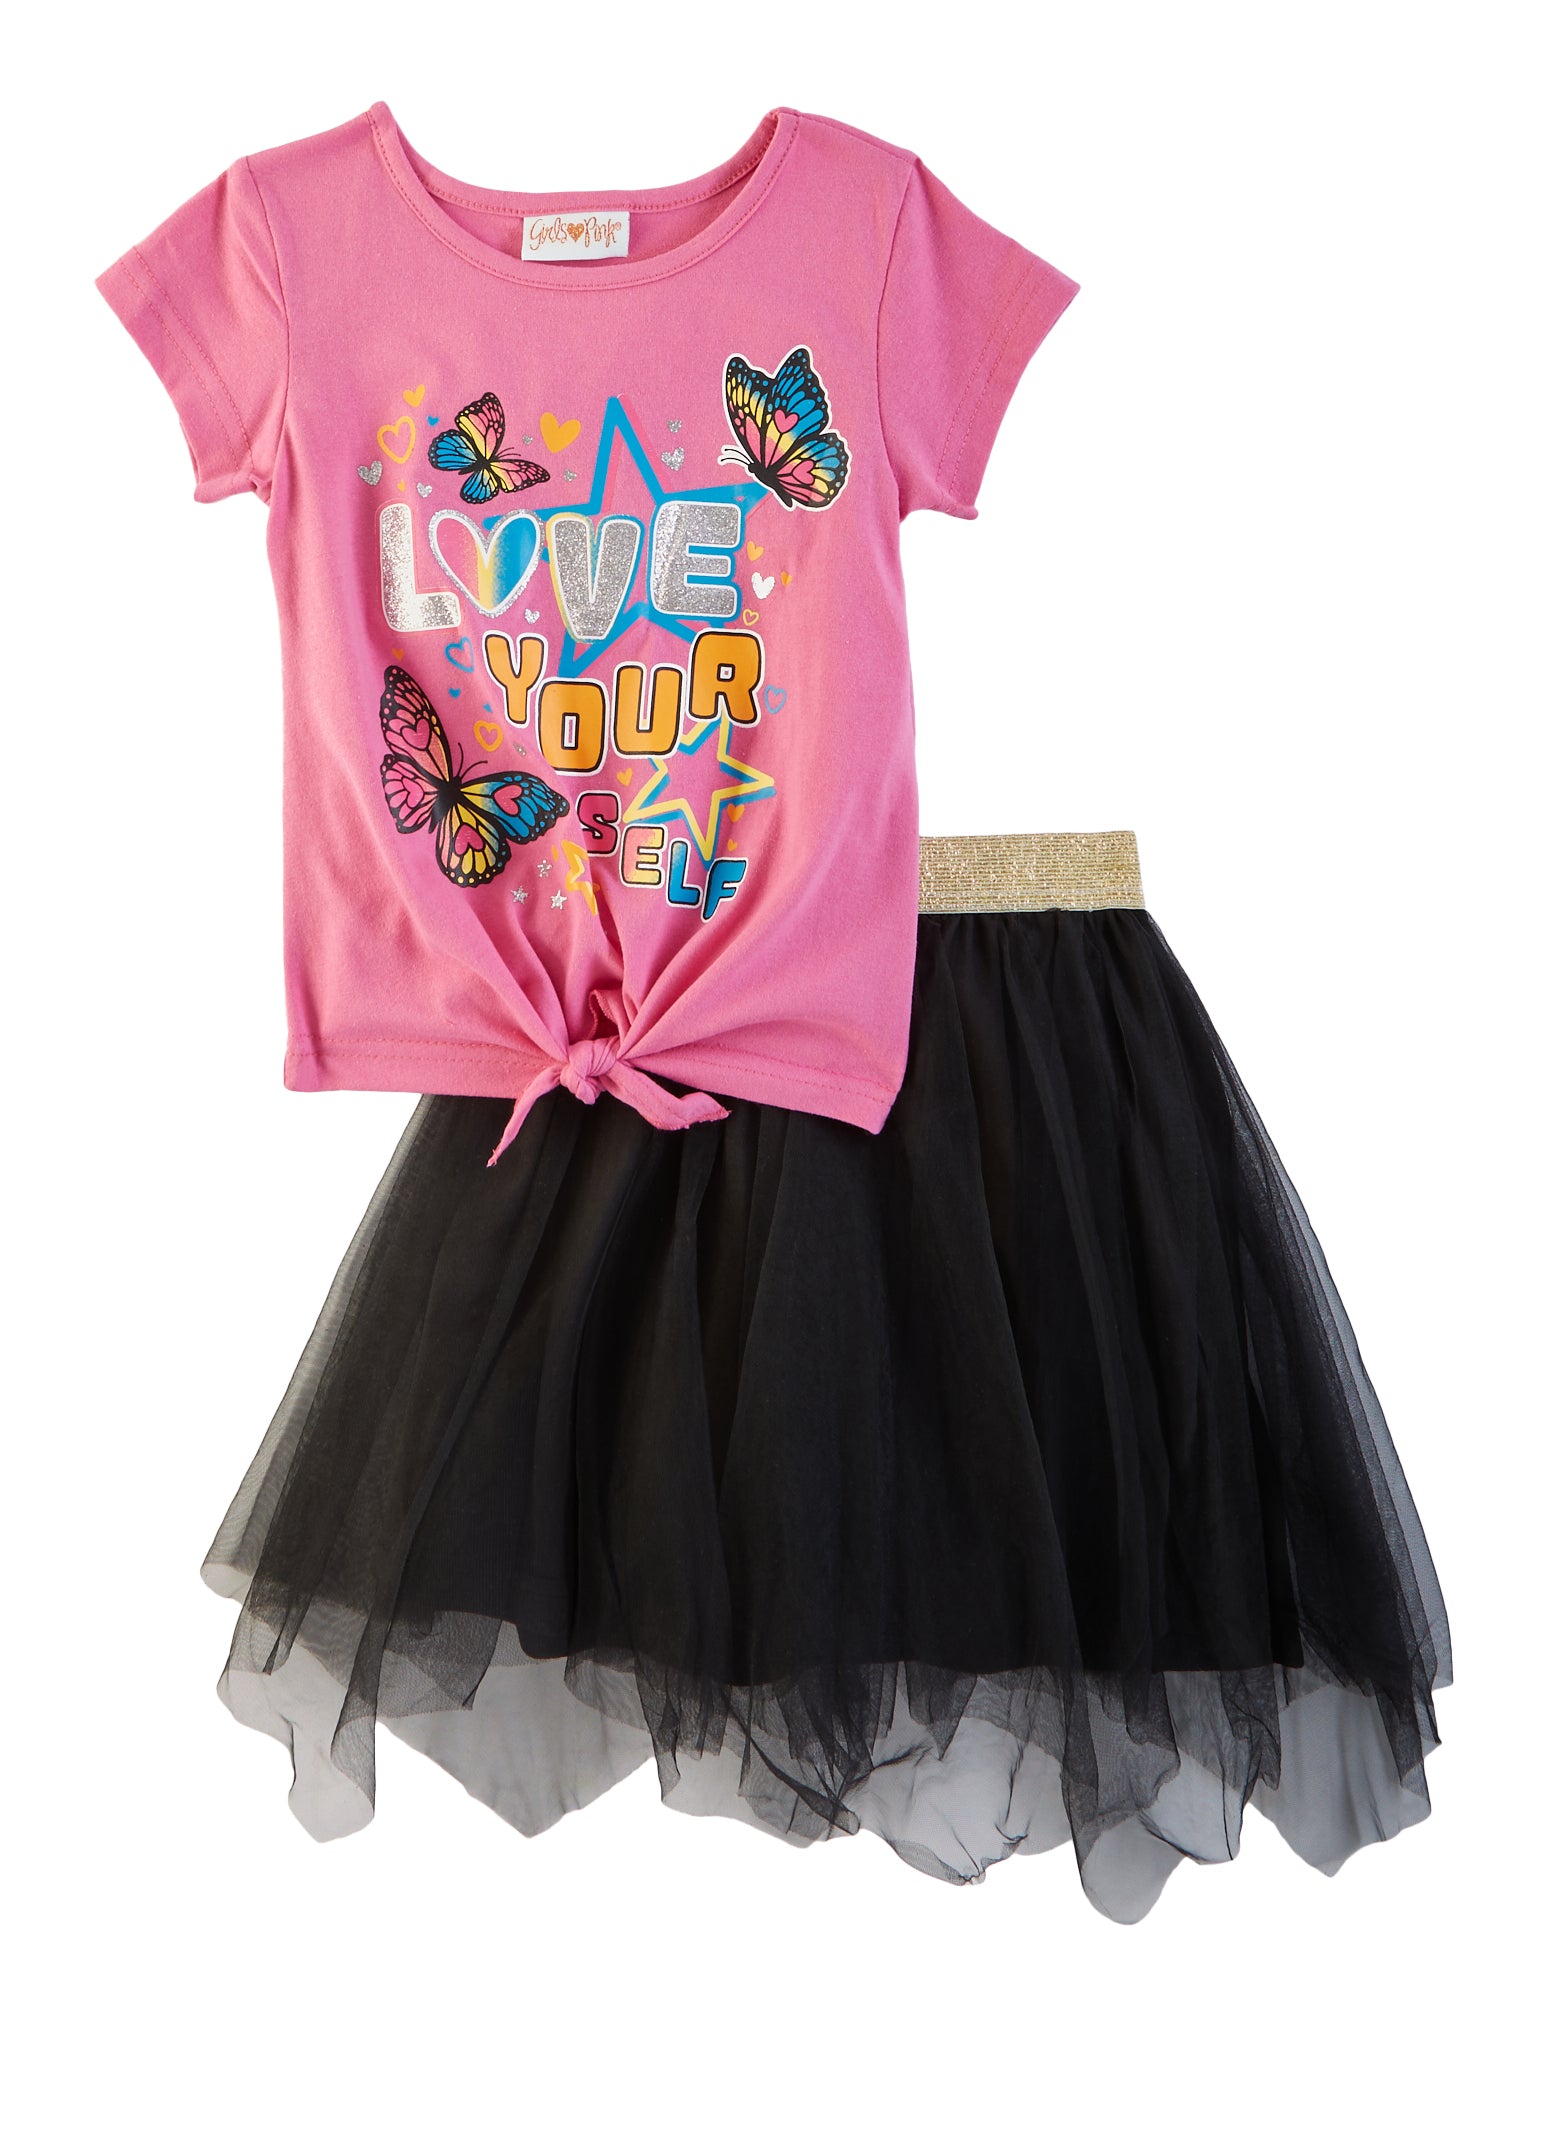 Little Girls Love Your Self Graphic Tee and Tutu Skirt, Pink, Size 4